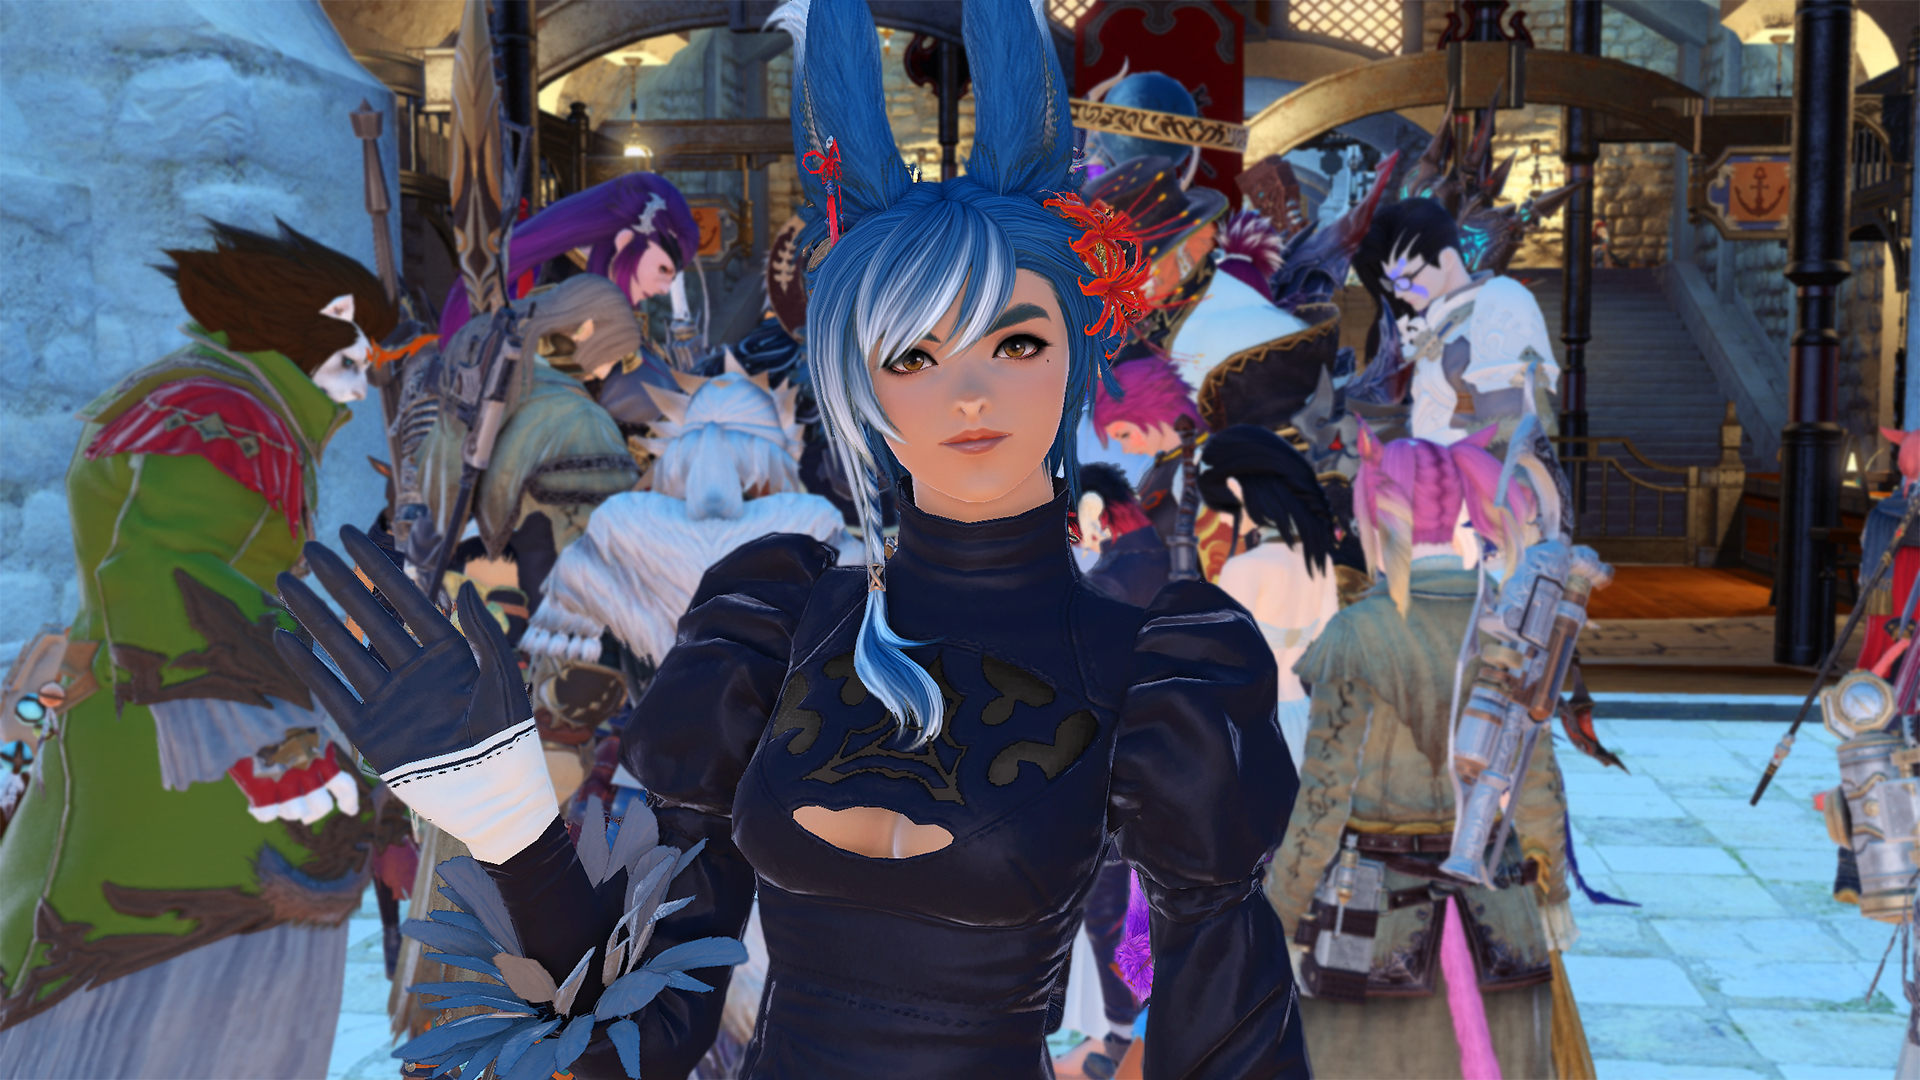 Final Fantasy 14 Endwalker launch day close-up of Viera with large crowd of players behind